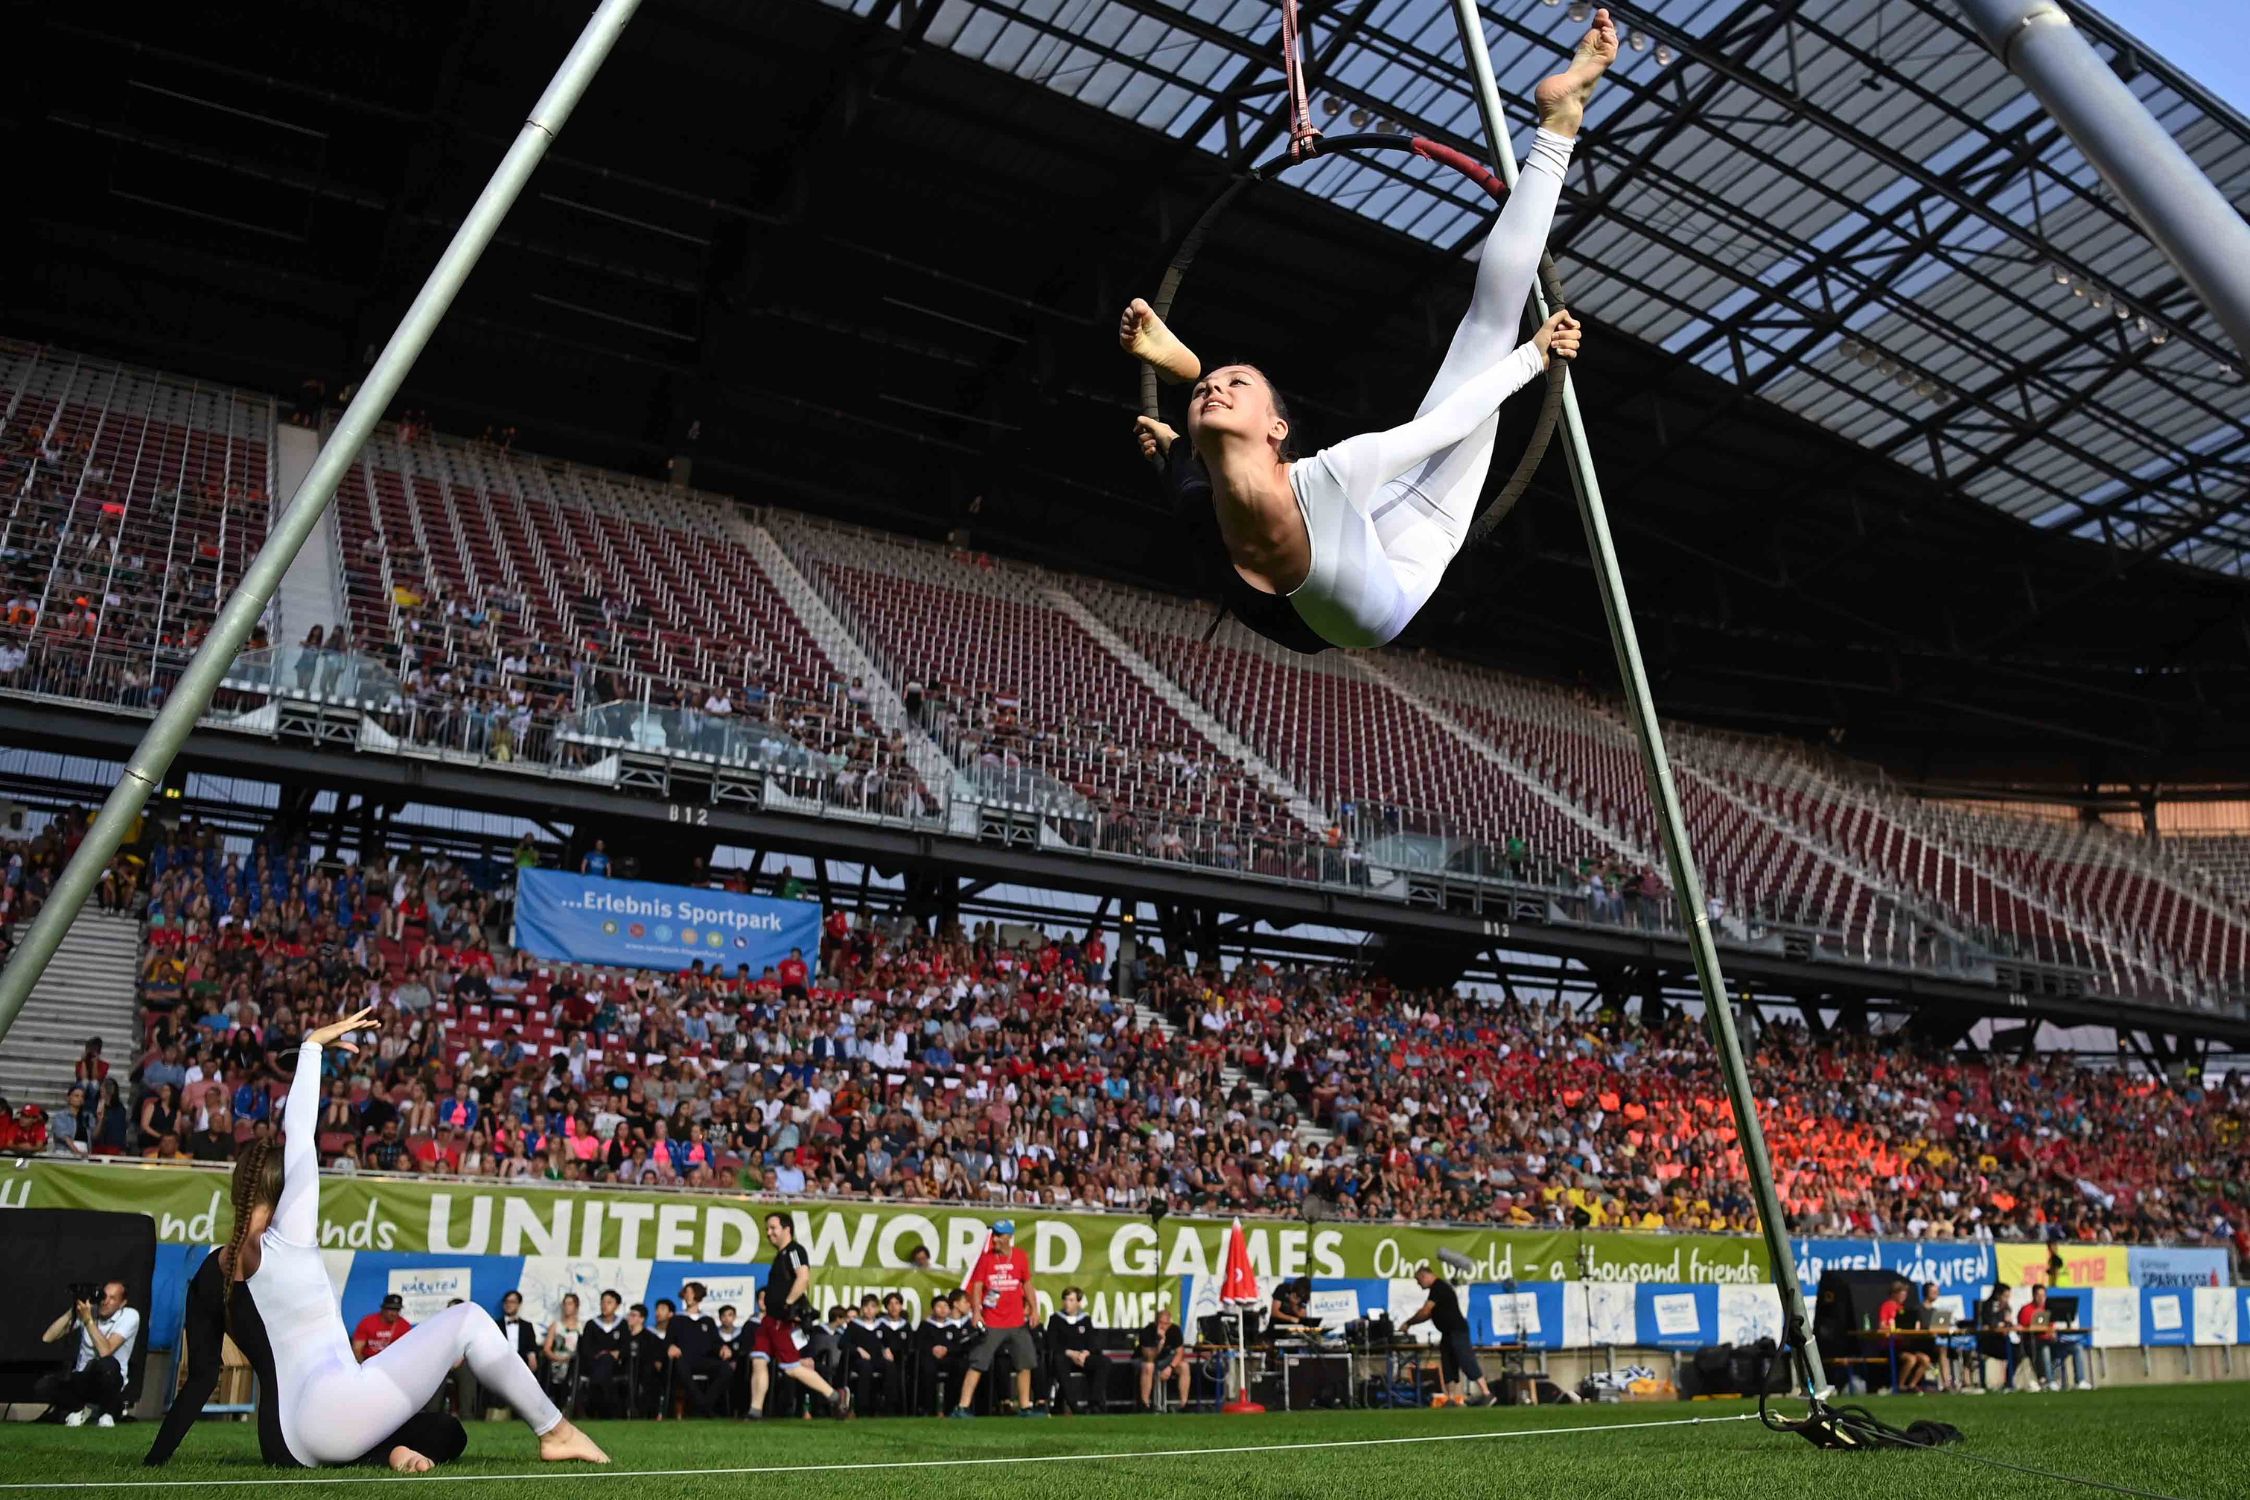 Young acrobat with audience in the background at the United World Games